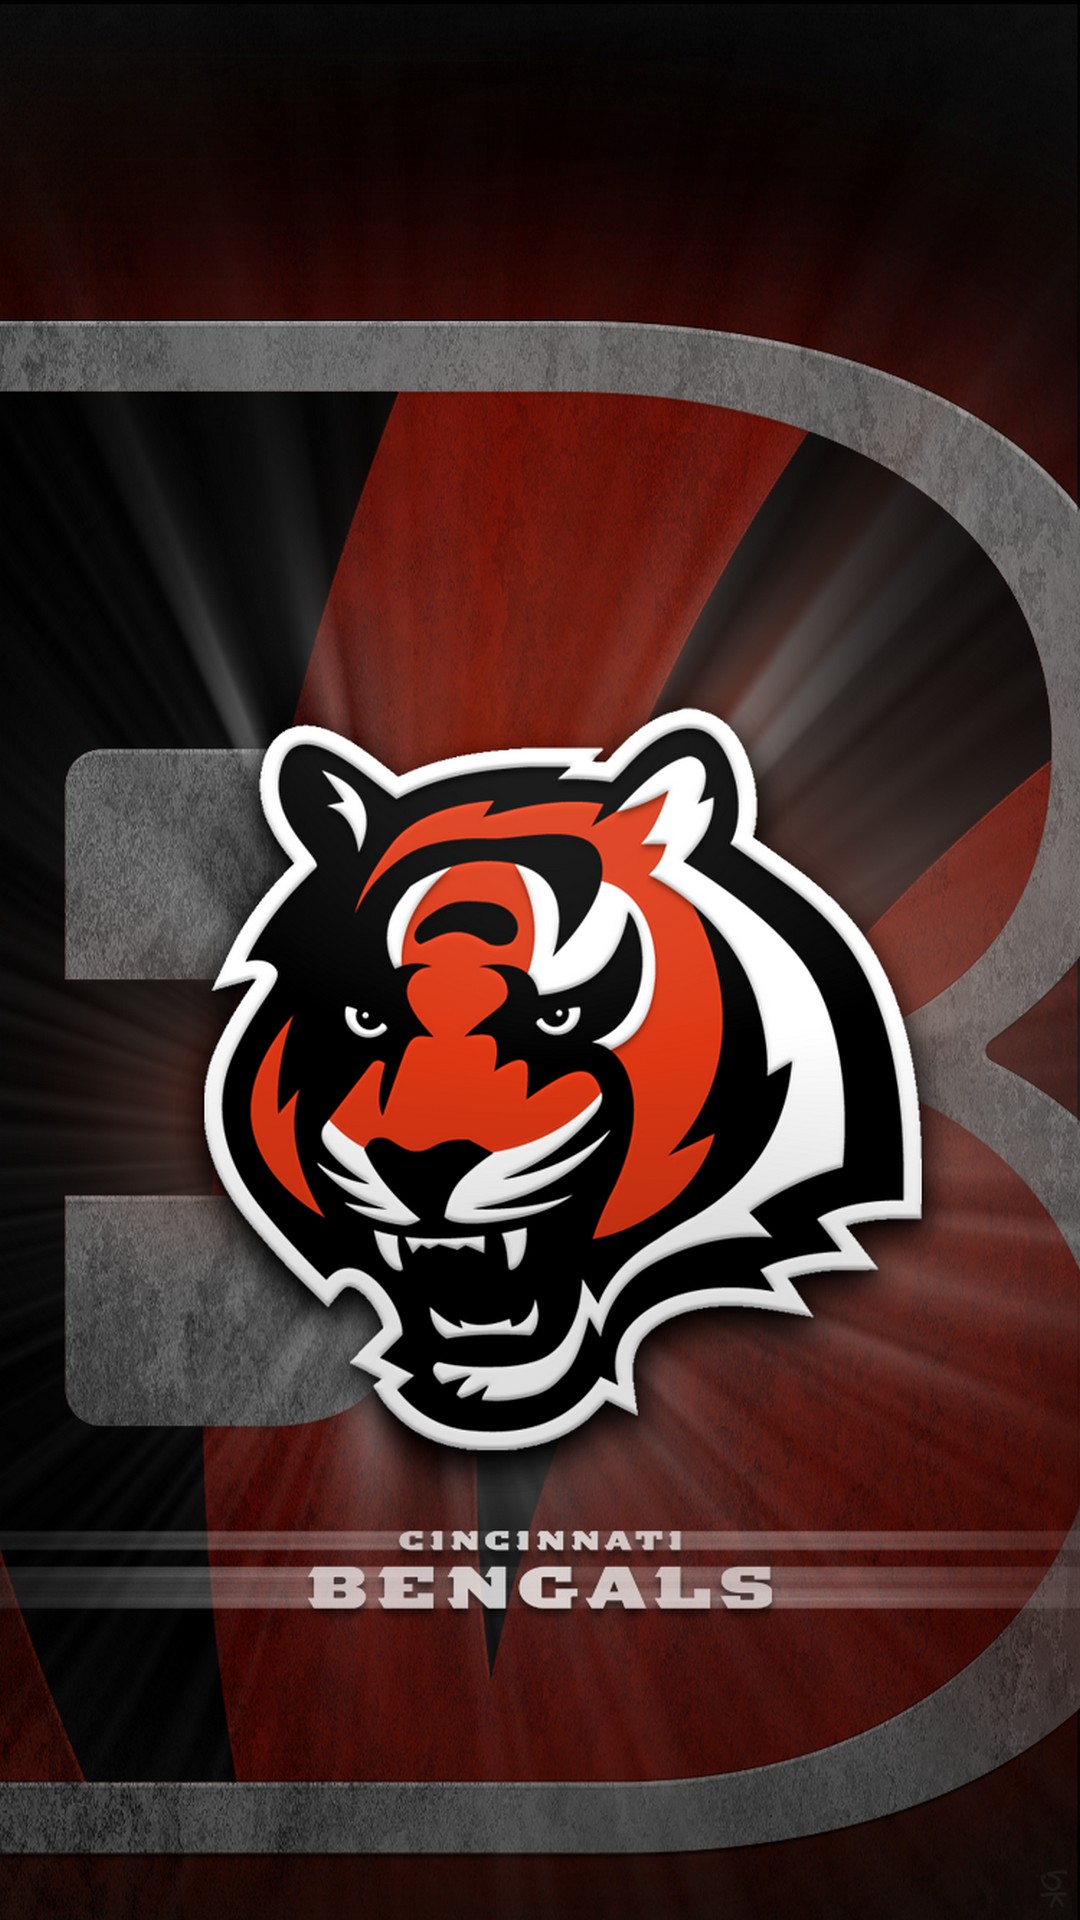 Cincinnati Bengals iPhone XS Wallpaper with high-resolution 1080x1920 pixel. Download and set as wallpaper for Apple iPhone X, XS Max, XR, 8, 7, 6, SE, iPad, Android